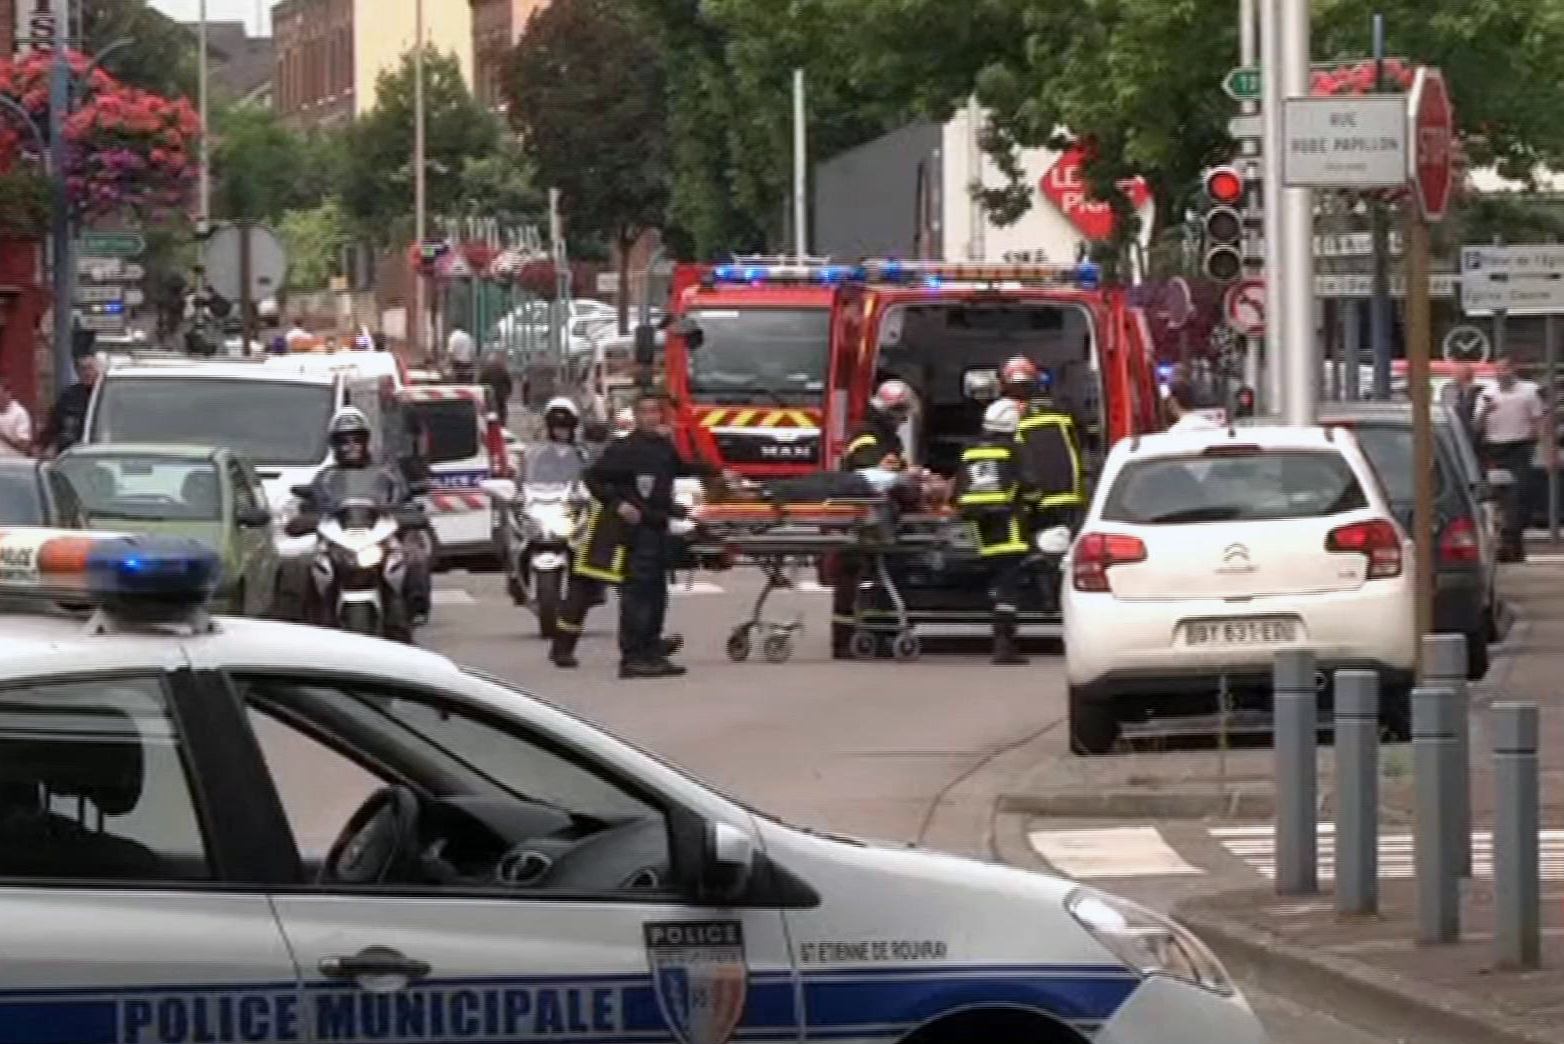 French hostage situation aftermath (BFM via AP)